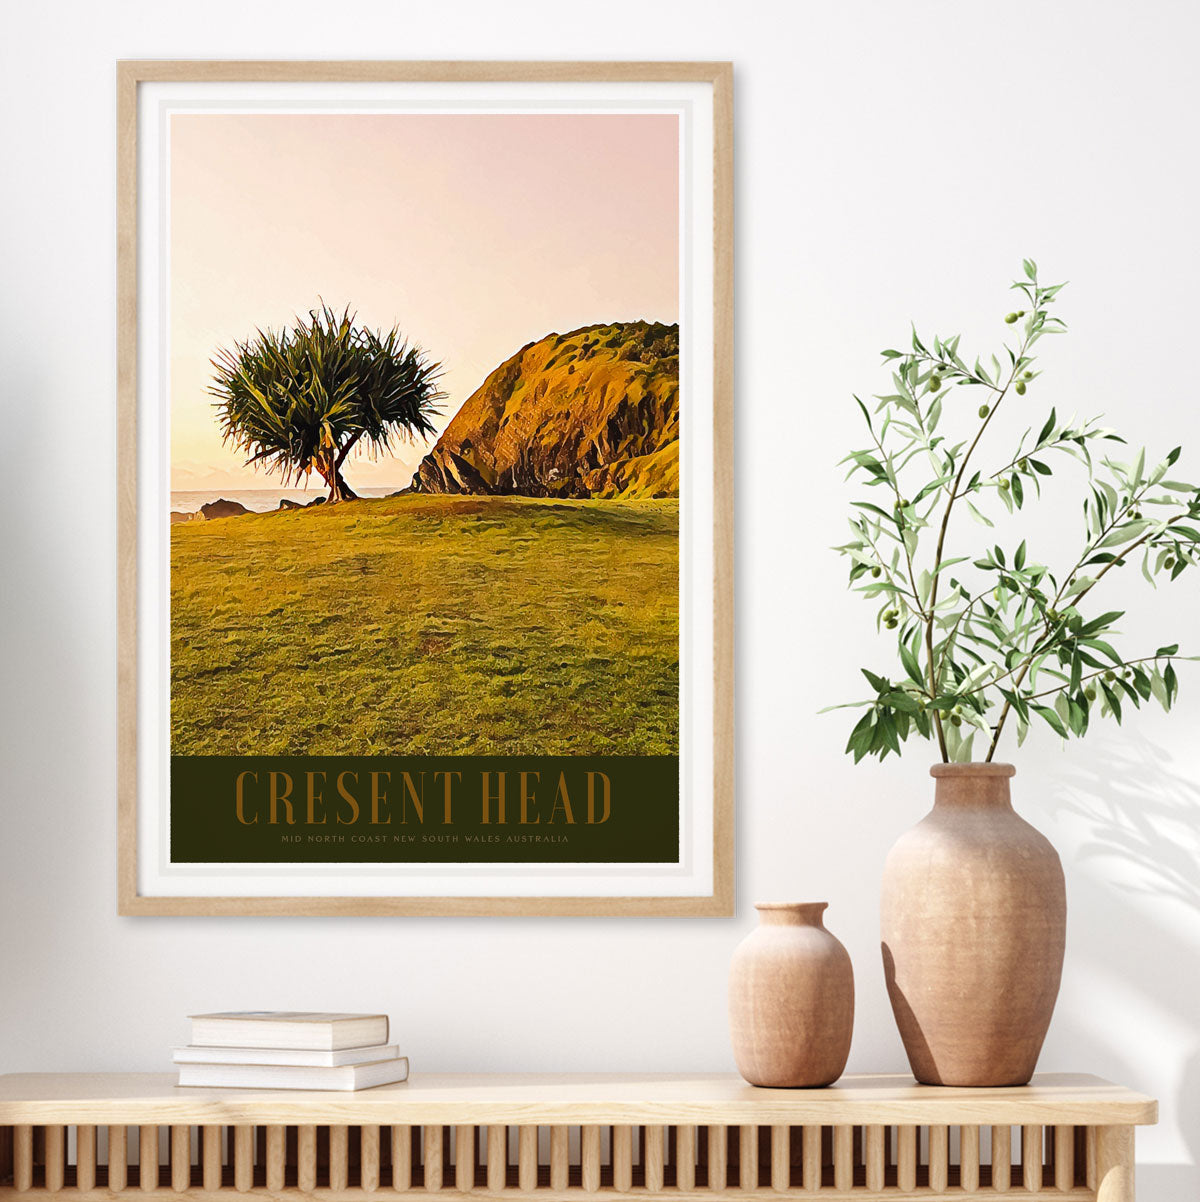 Cresent Head NSW Australia retro vintage poster from Places We Luv